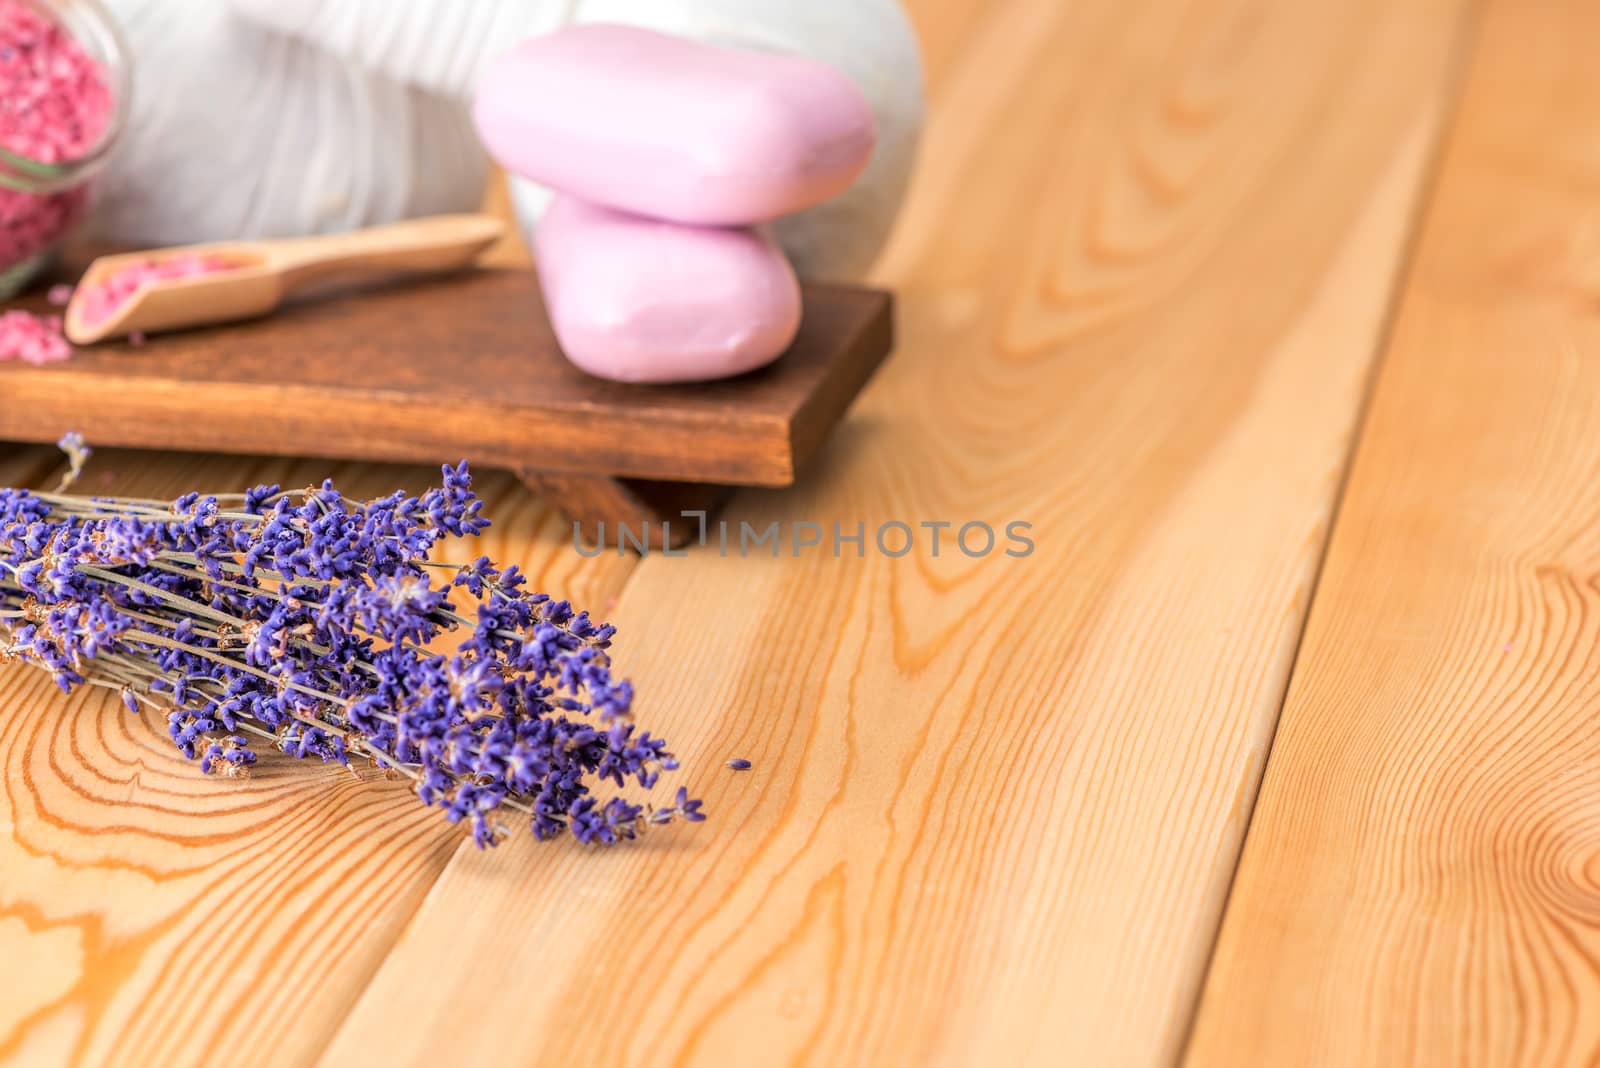 dried lavender and soap with natural lavender extract for spa treatments and relaxation on wooden boards close-up